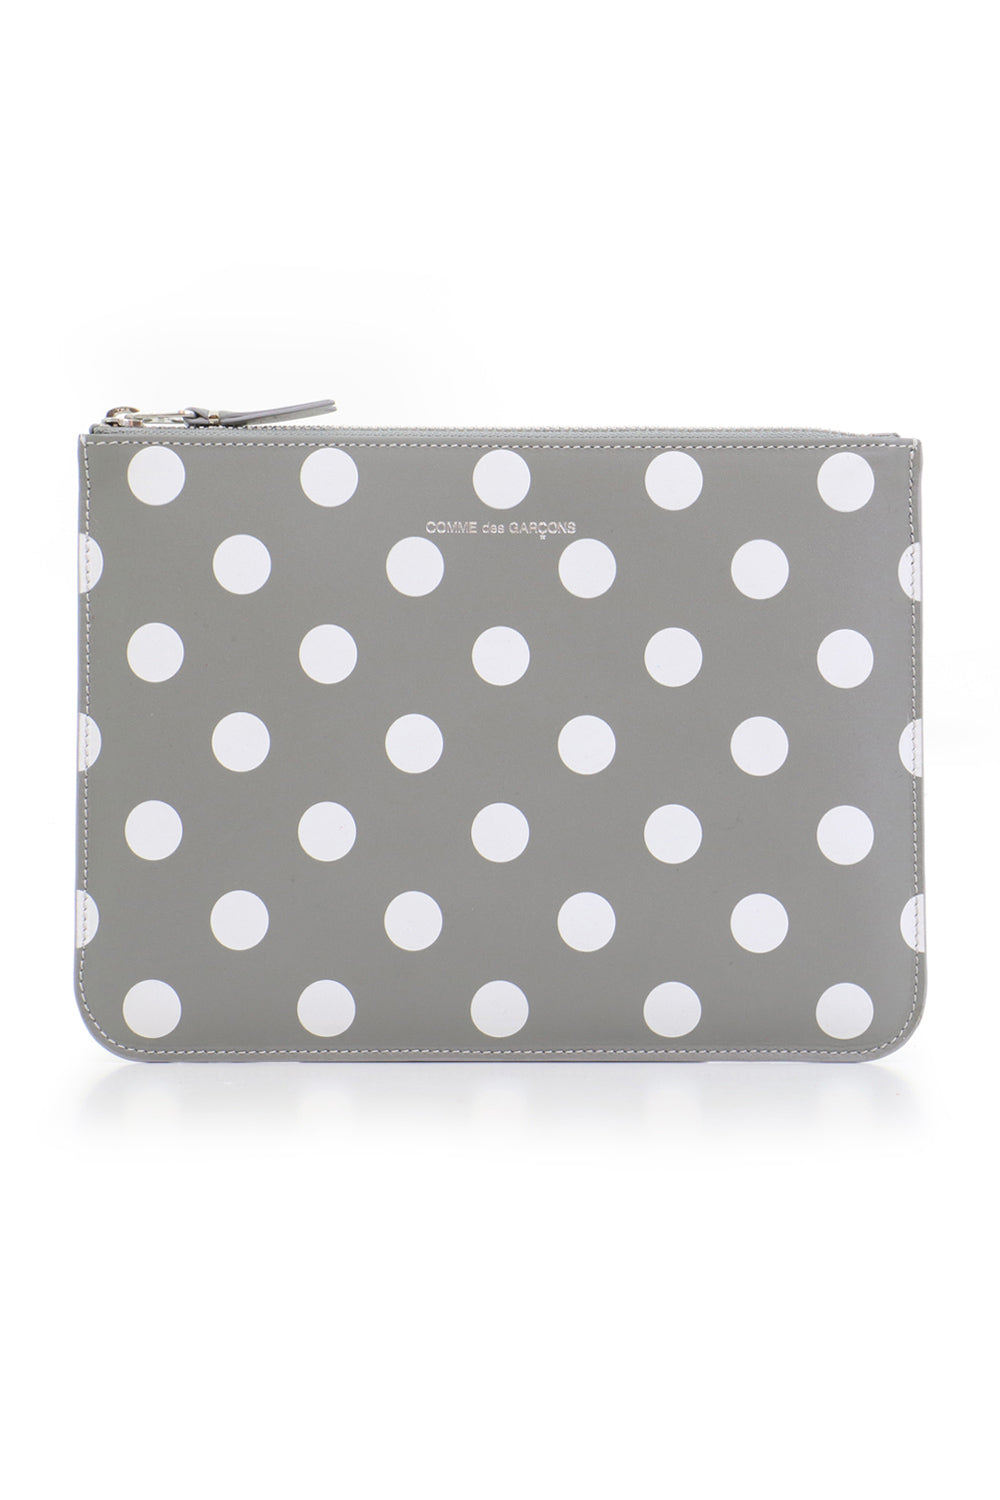 COMME DES GARCONS BAGS GREY POLKA DOT LEATHER POUCH GREY